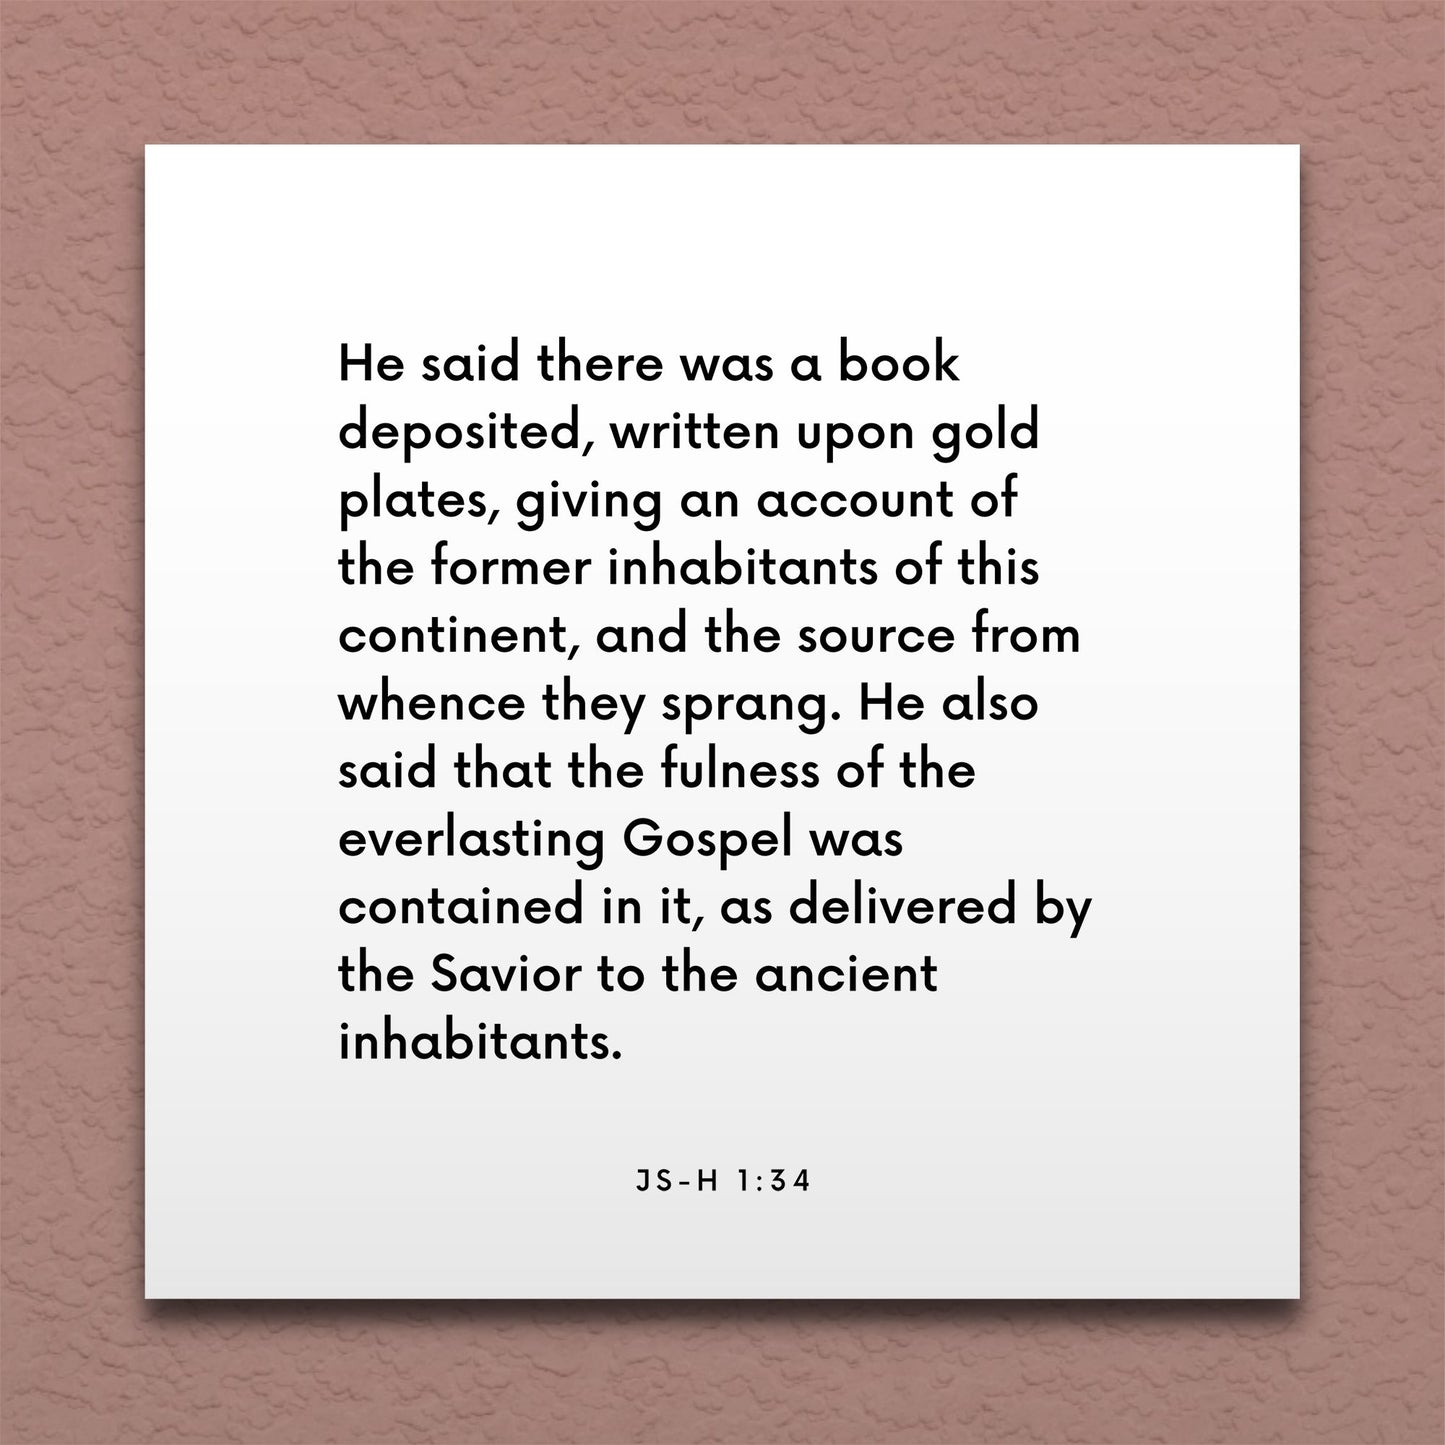 Wall-mounted scripture tile for JS-H 1:34 - "There was a book deposited, written upon gold plates"